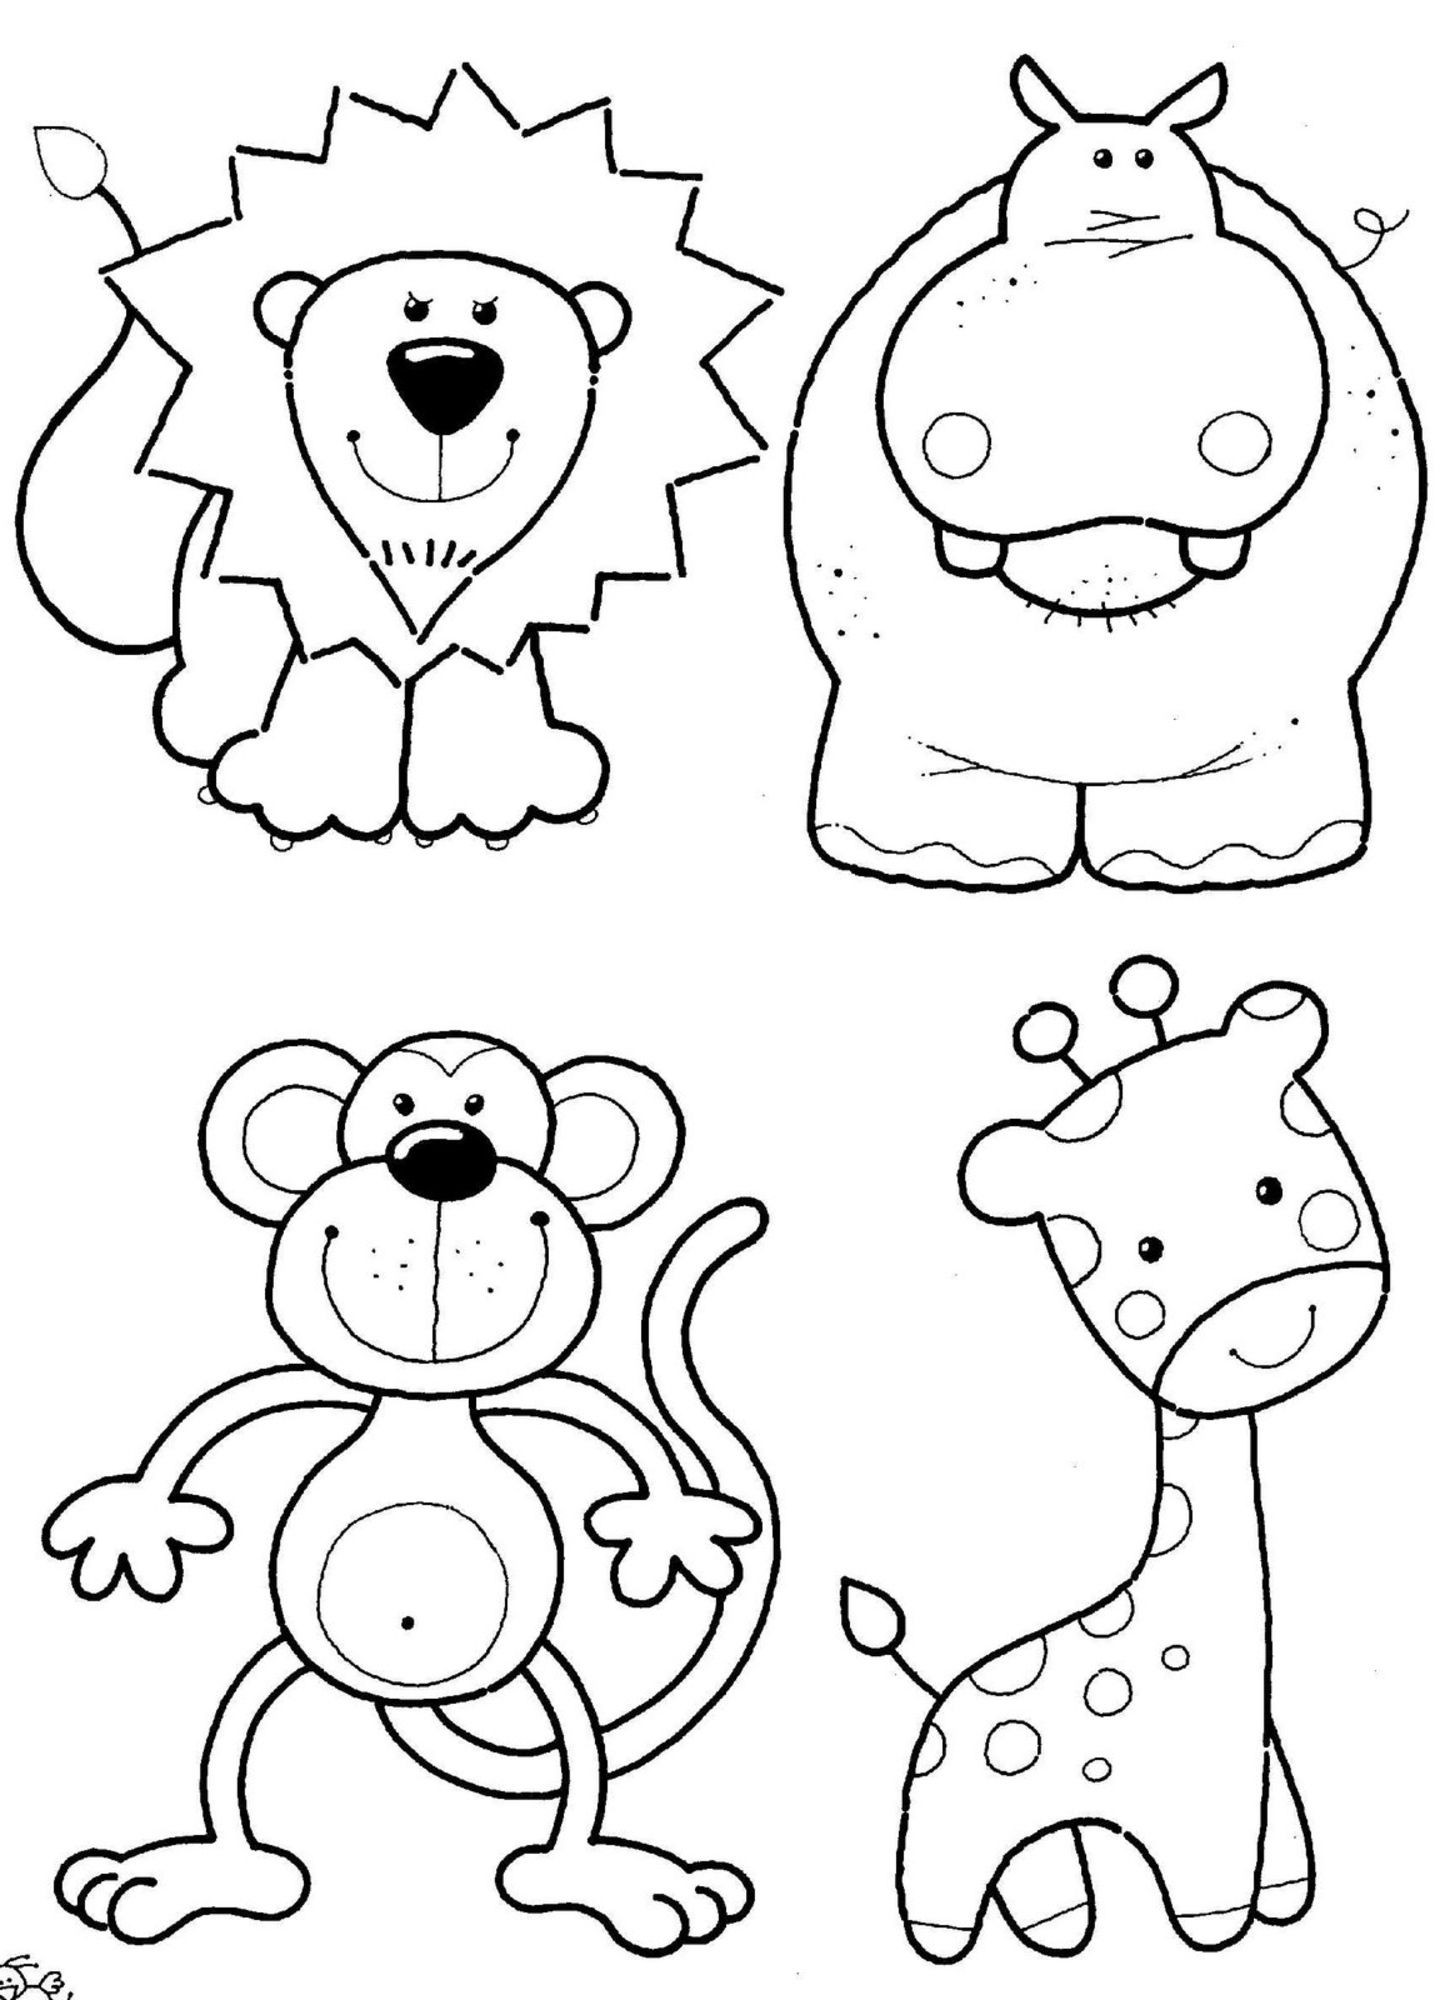 Baby Zoo Animals Coloring Pages
 Felt craft inspiration animals for baby quilt [already